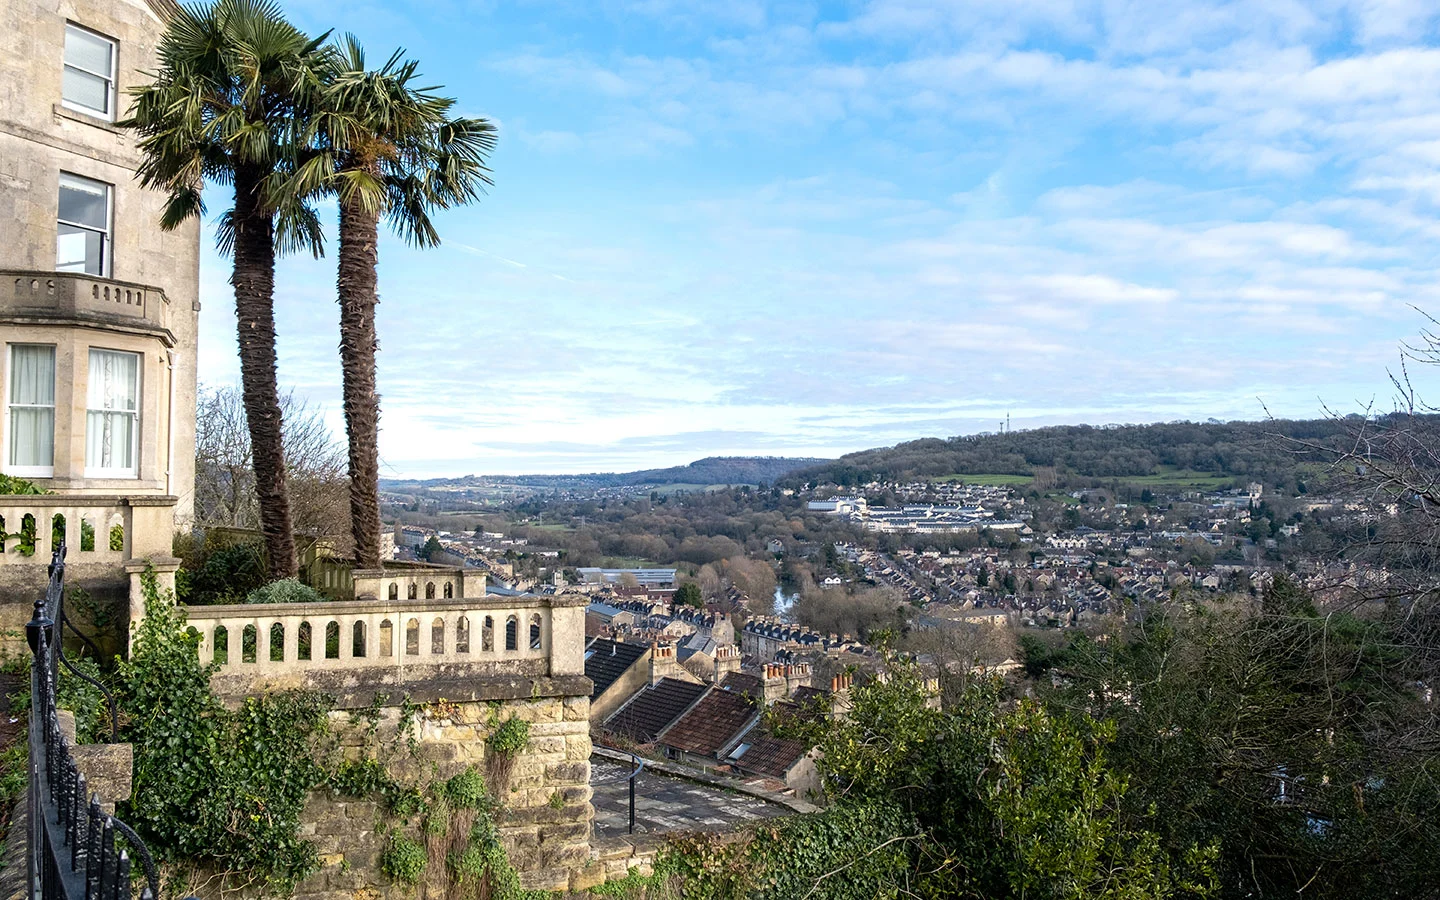 Views from Camden Crescent in Bath